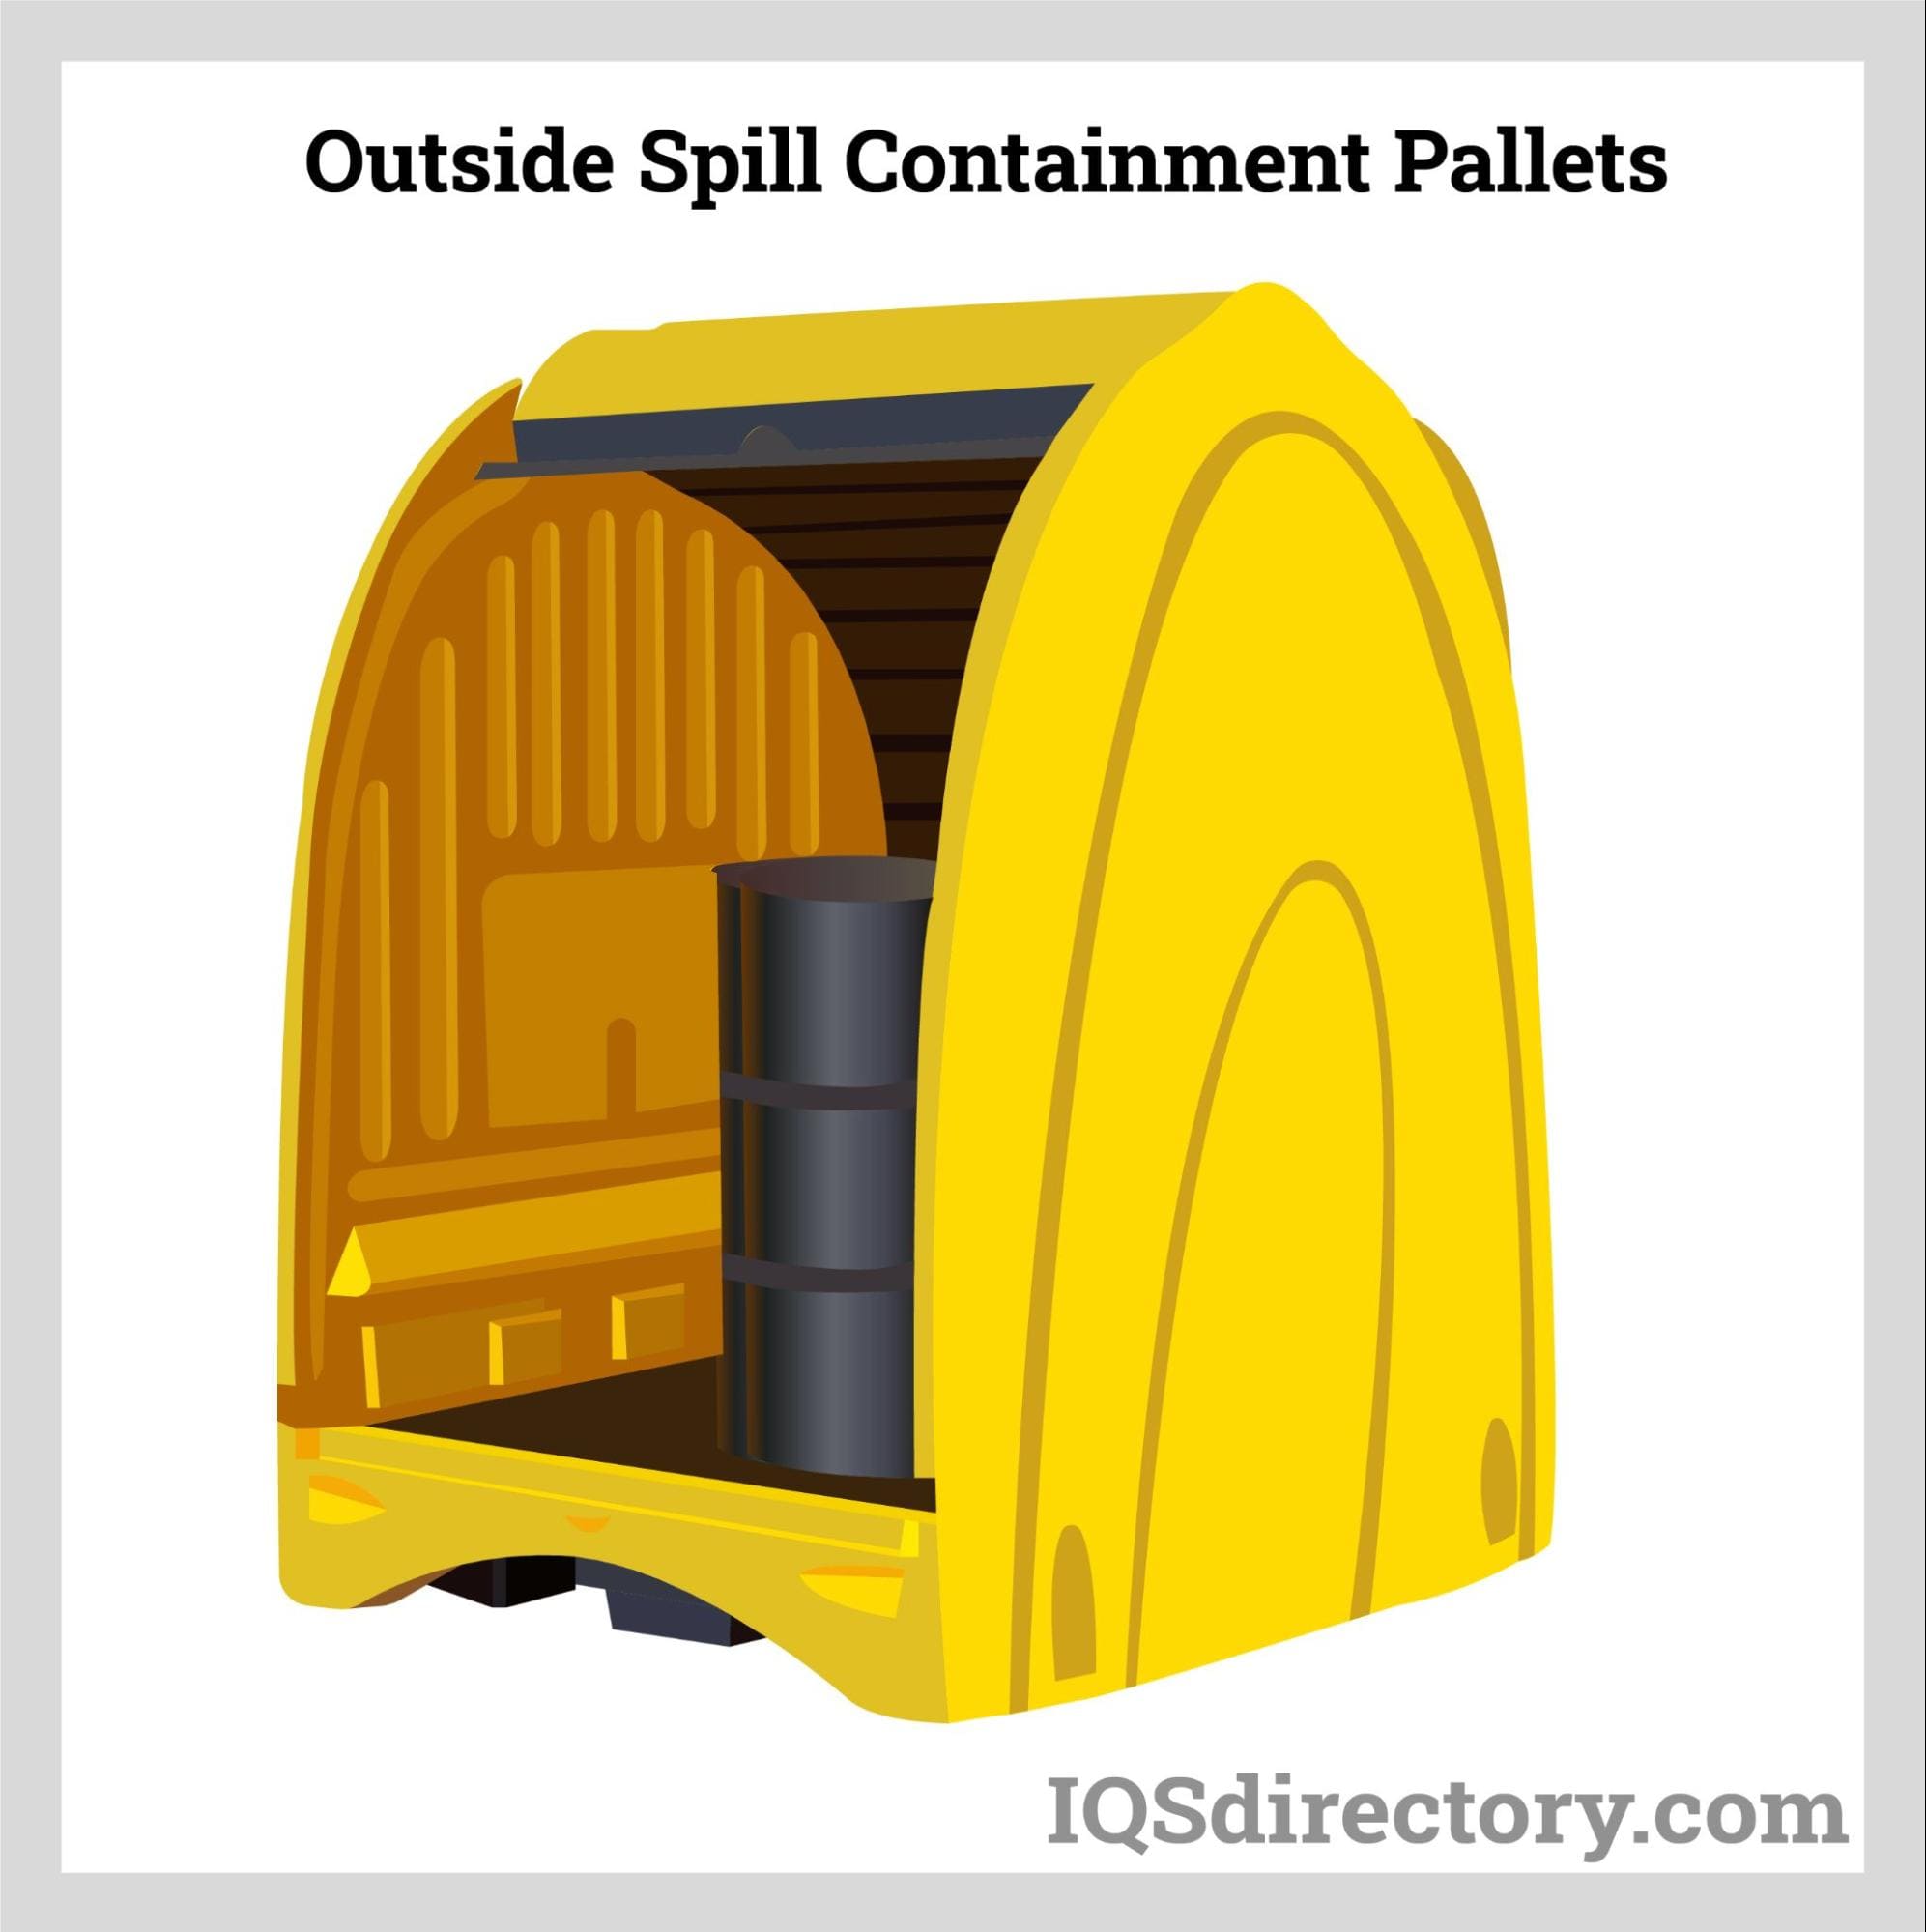 Outside Spill Containment Pallets